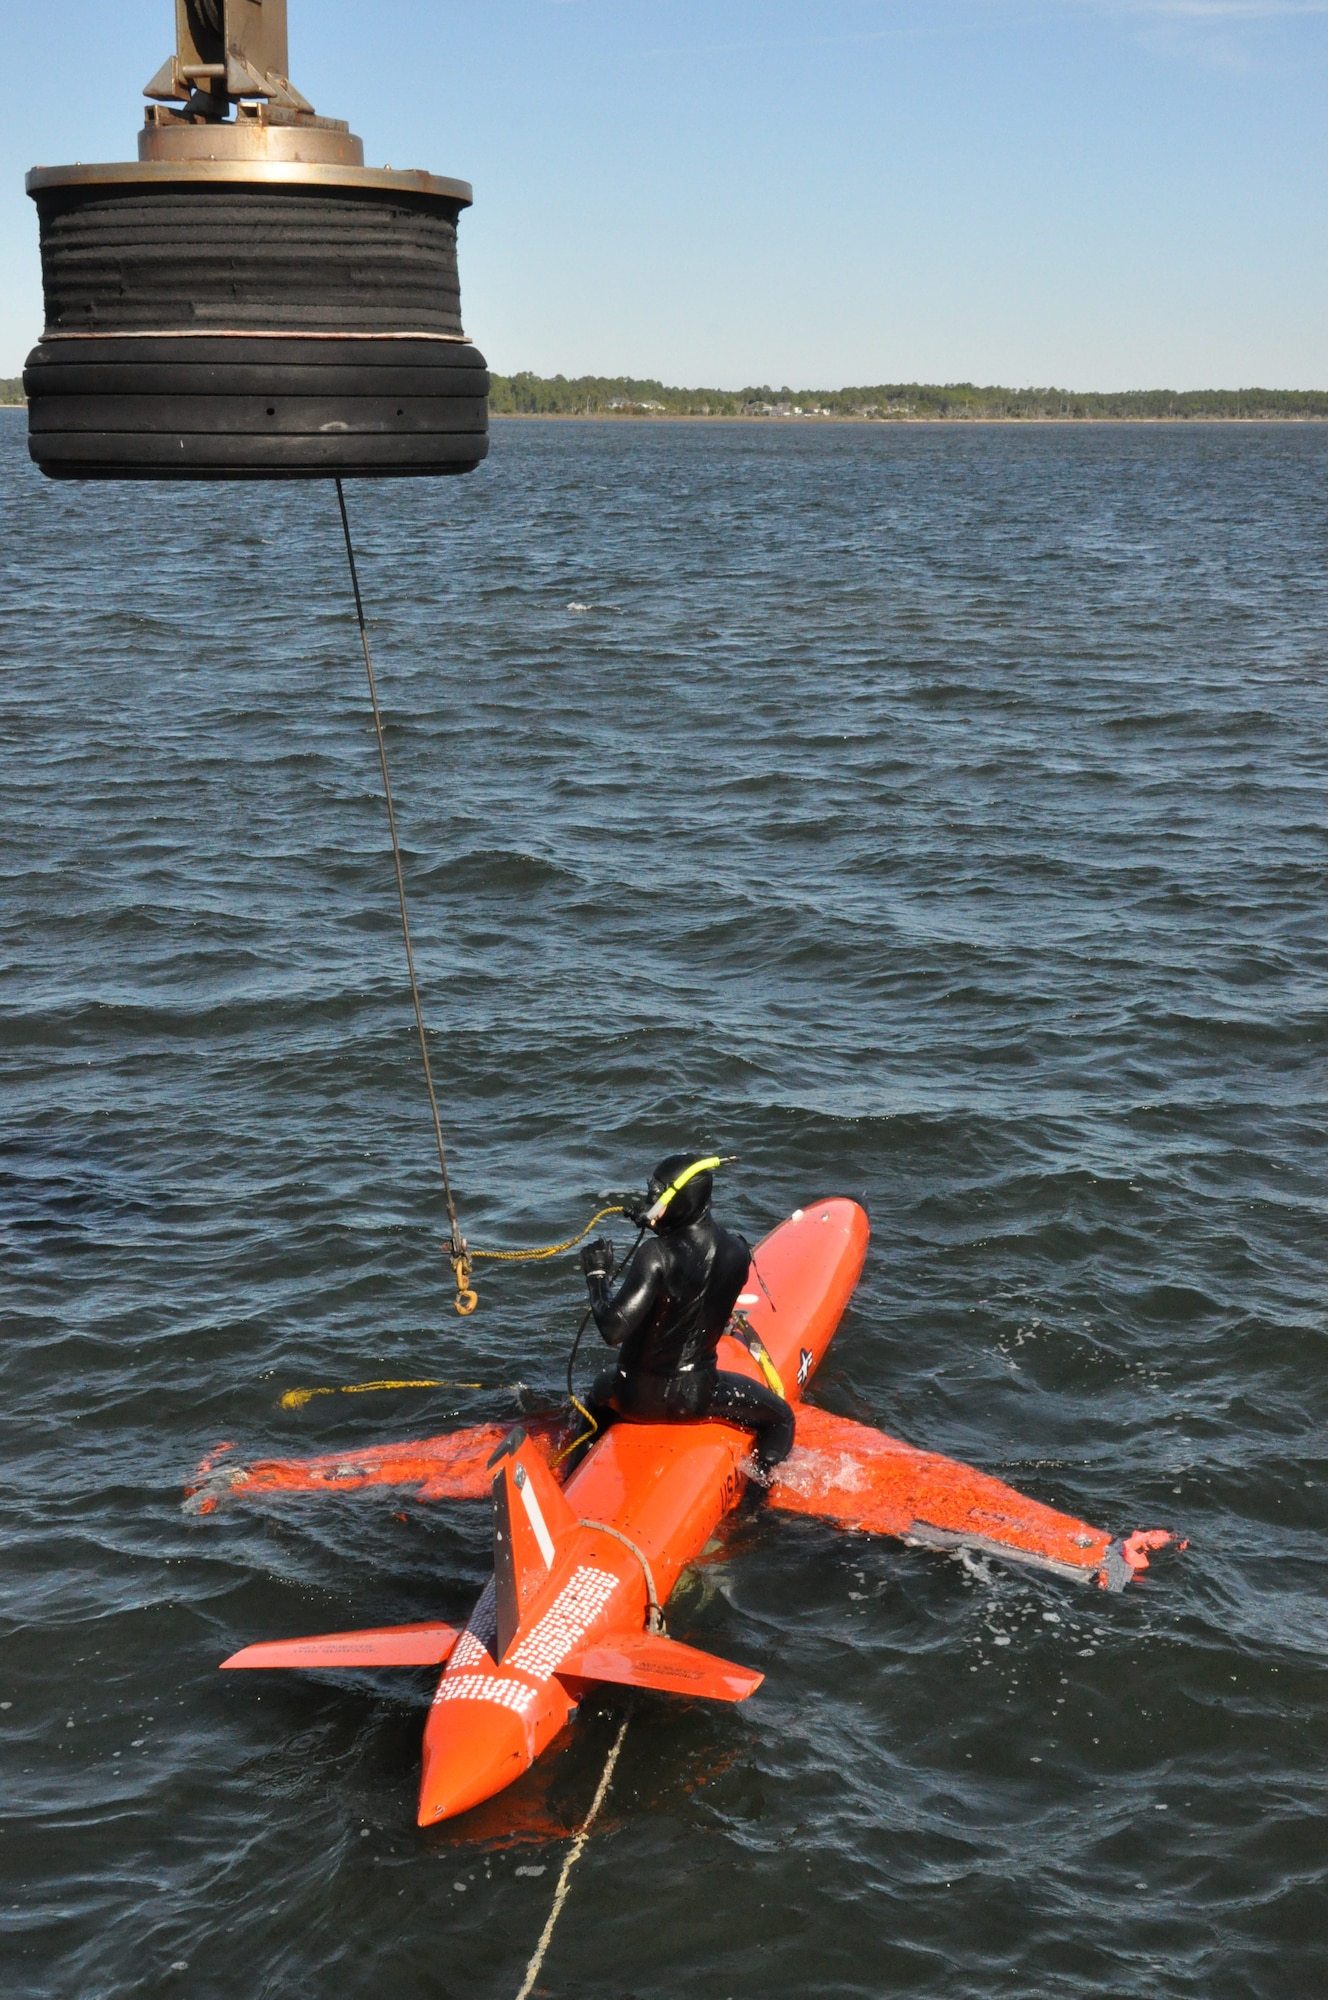 Mr. Chris Geradine, 82nd Aerial Targets Squadron Missile Retriever commercial diver, prepares to recover a BQM-167A drone during a training run. (U.S. Air Force photo by Staff Sgt. Rachelle Elsea)